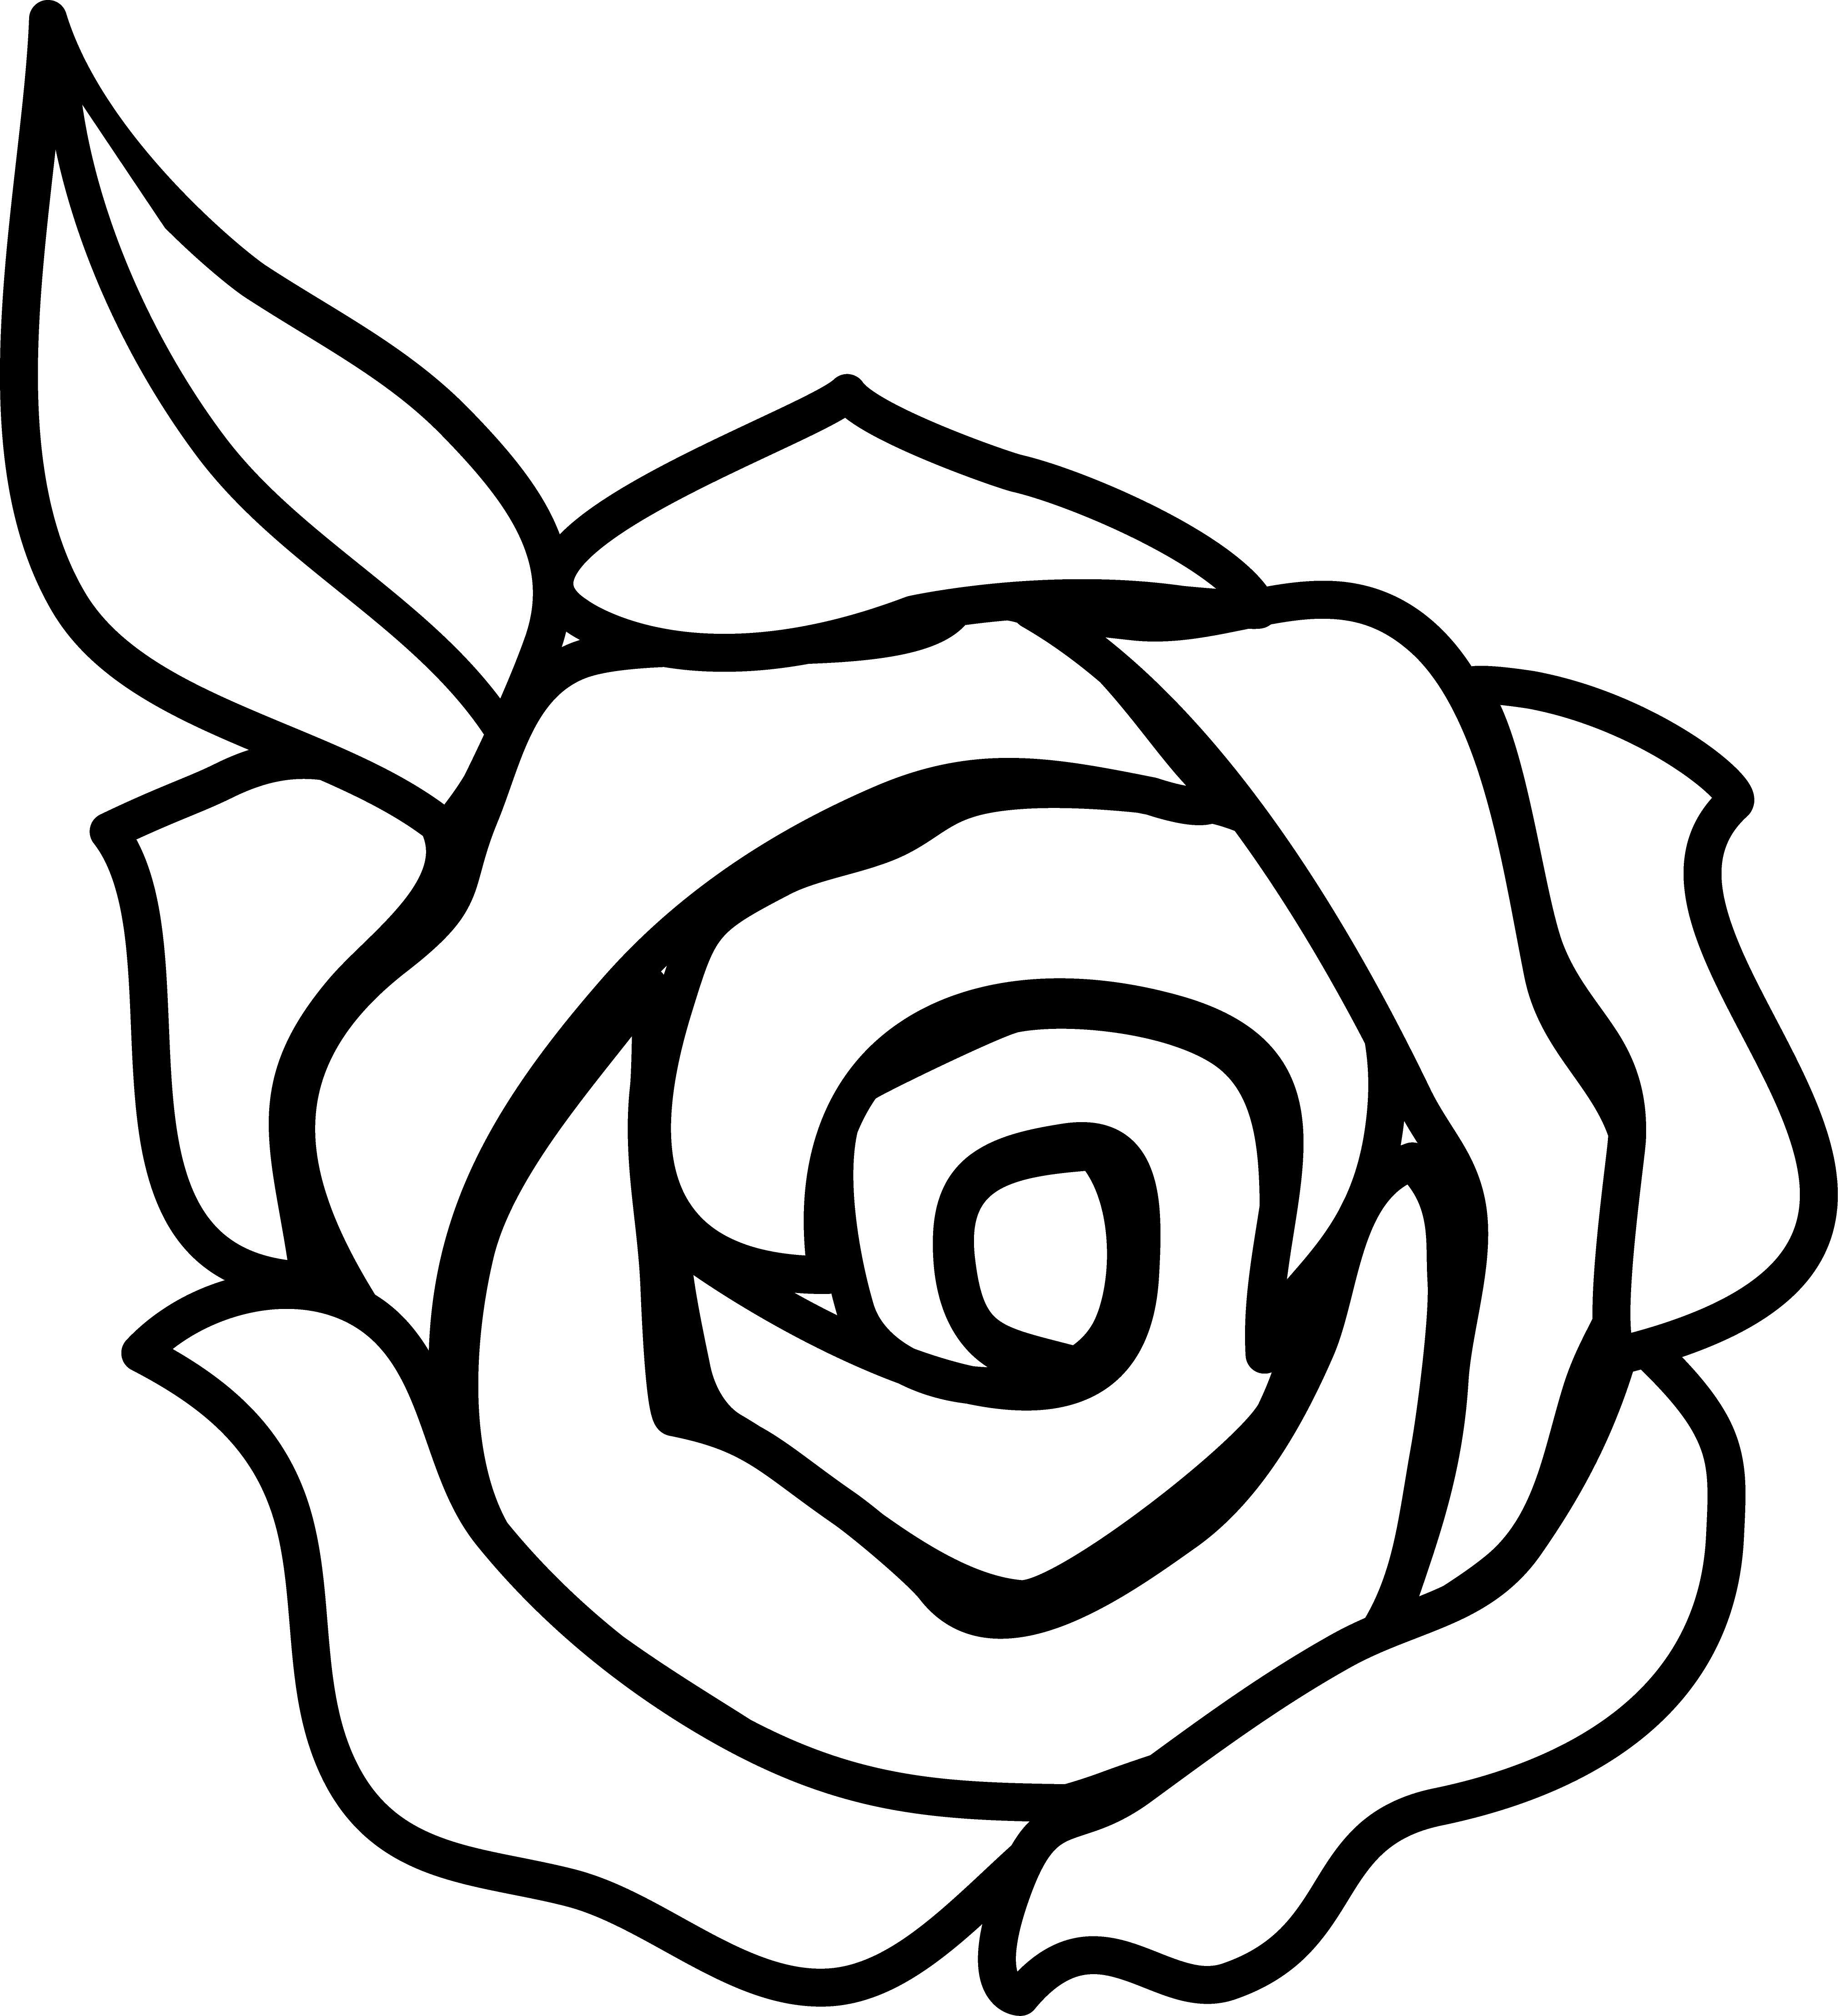 Black And White Drawings Of Roses - Clipart library